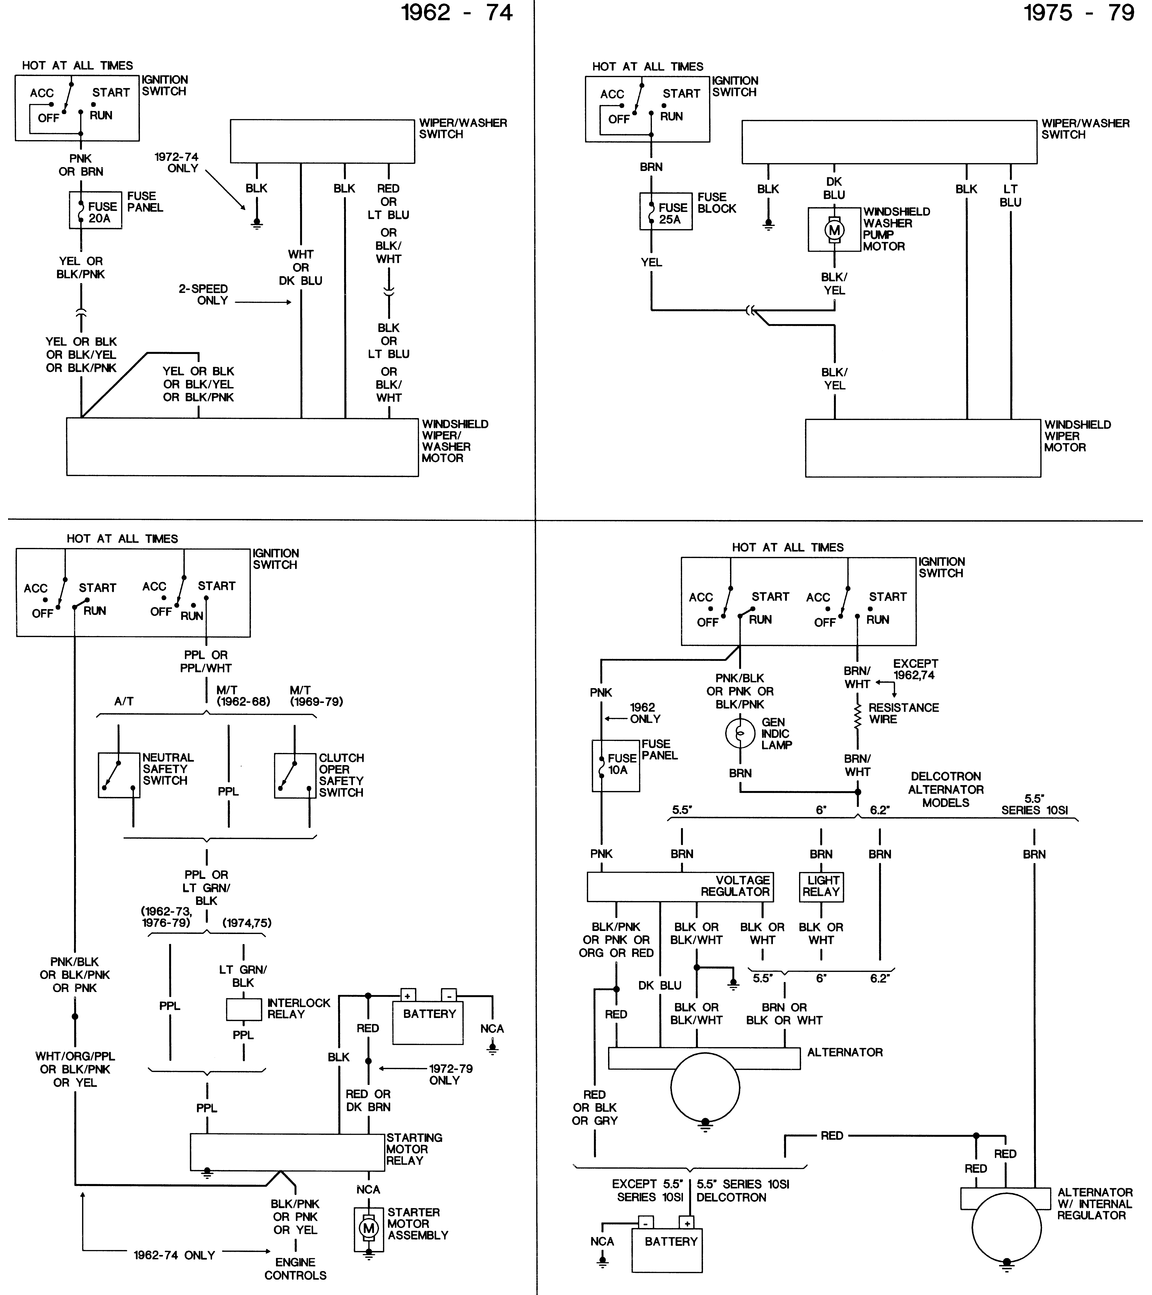 1969-1970 Chevy Wiring Diagrams - FreeAutoMechanic 1974 corvette under hood wiring harness diagram 